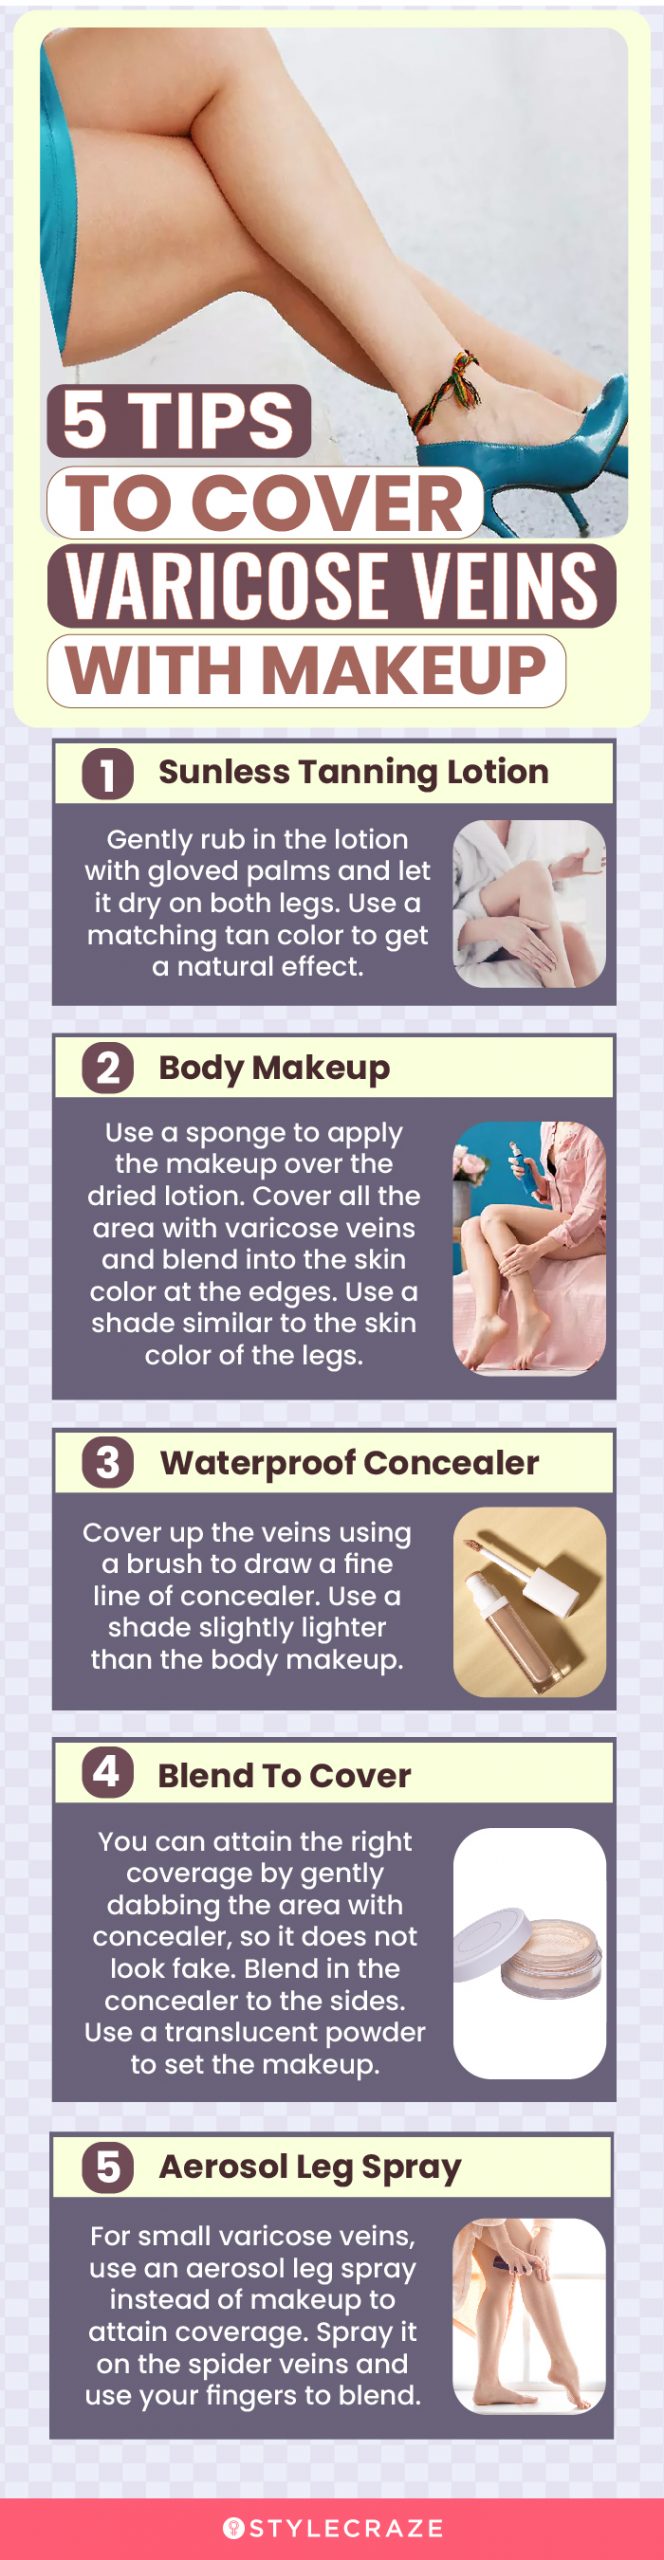 5 tips to cover varicose veins with makeup (infographic)